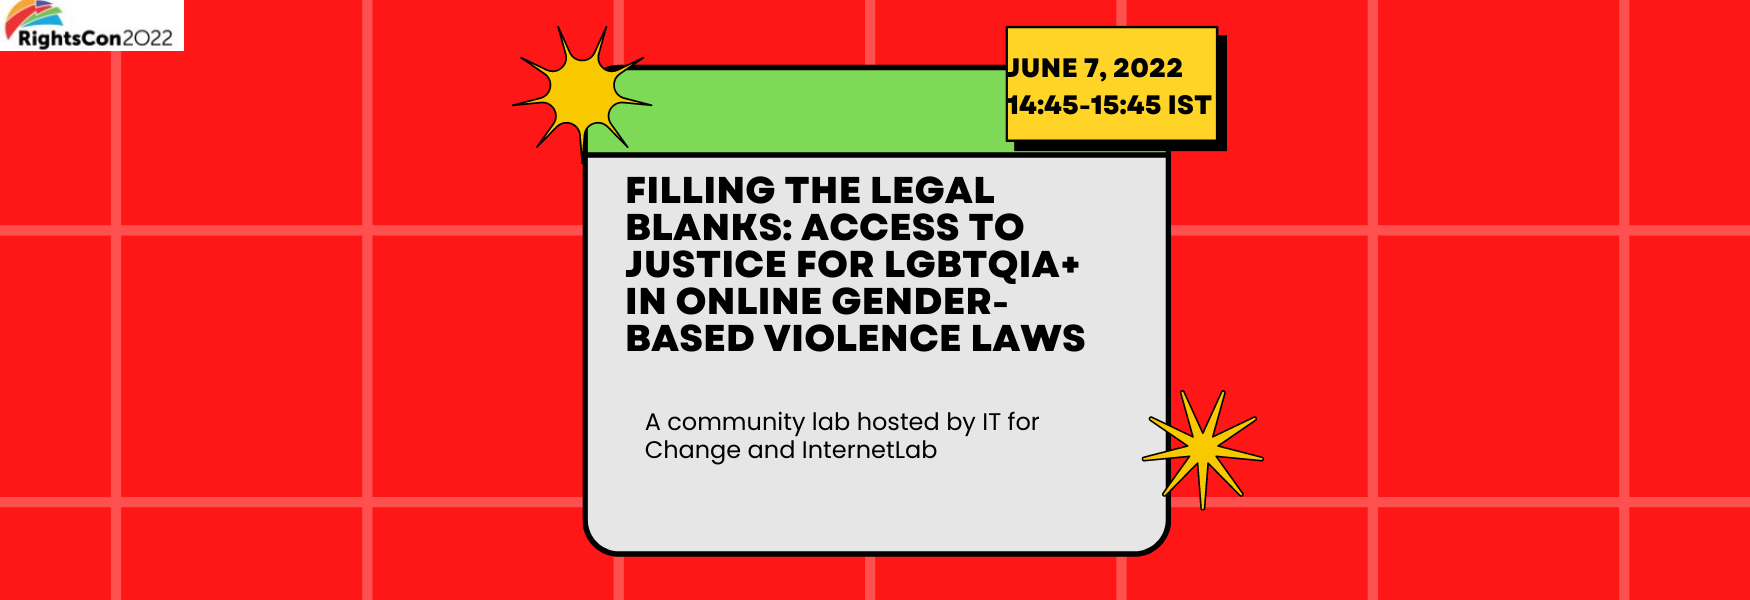 Filling the Legal Blanks: Access to Justice for LGBTQIA+ in Online Gender-Based Violence Laws